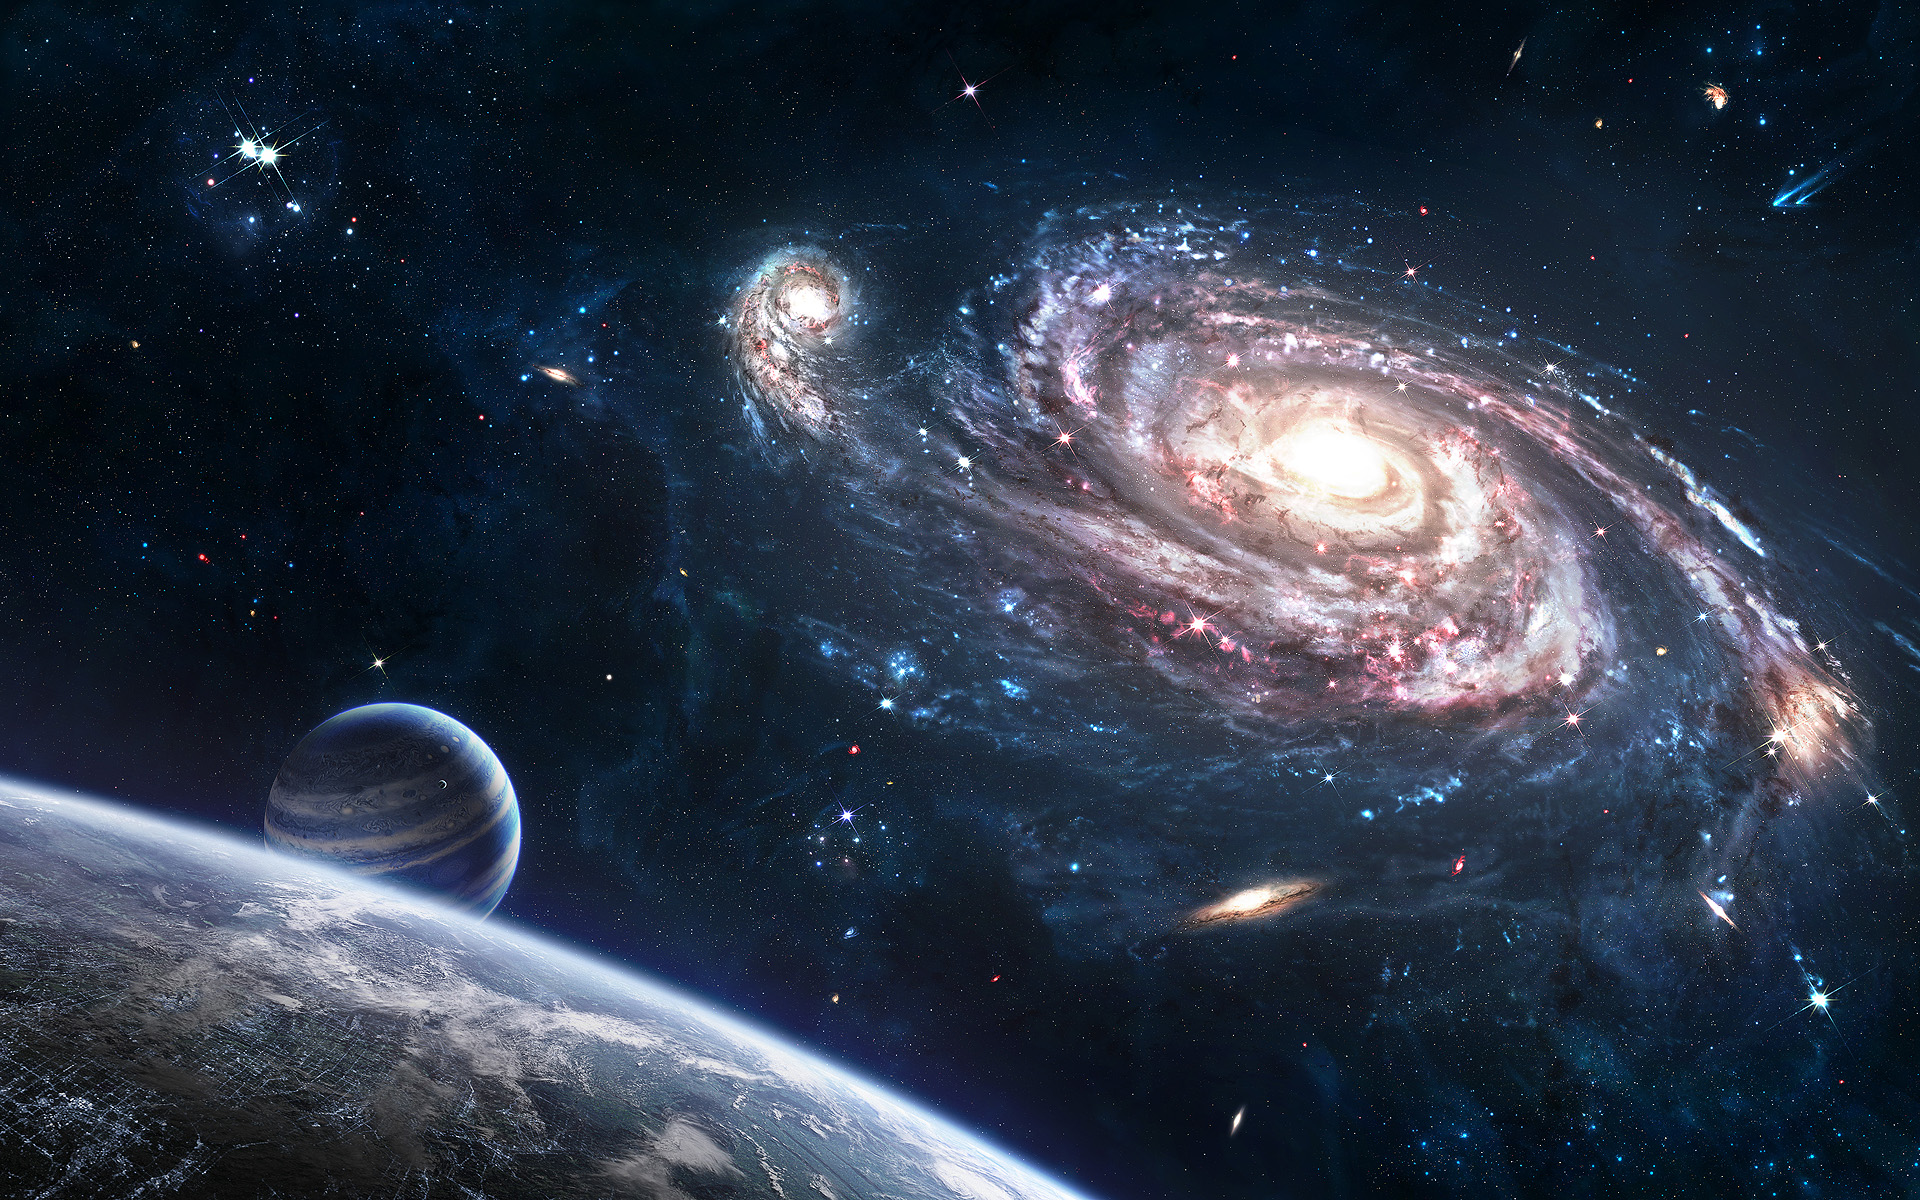 outer space, stars, galaxies, planets - desktop wallpaper